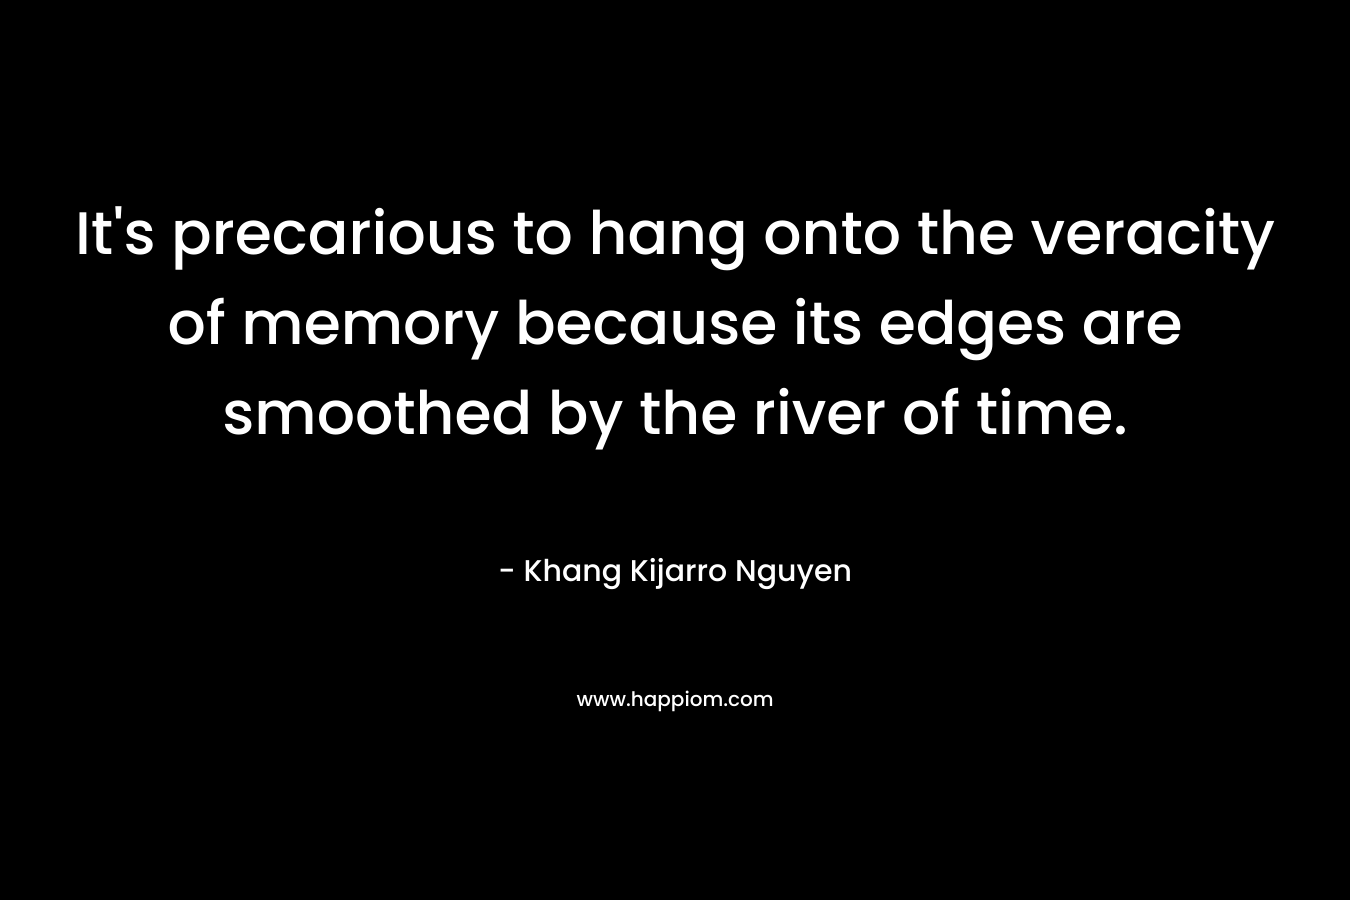 It’s precarious to hang onto the veracity of memory because its edges are smoothed by the river of time. – Khang Kijarro Nguyen